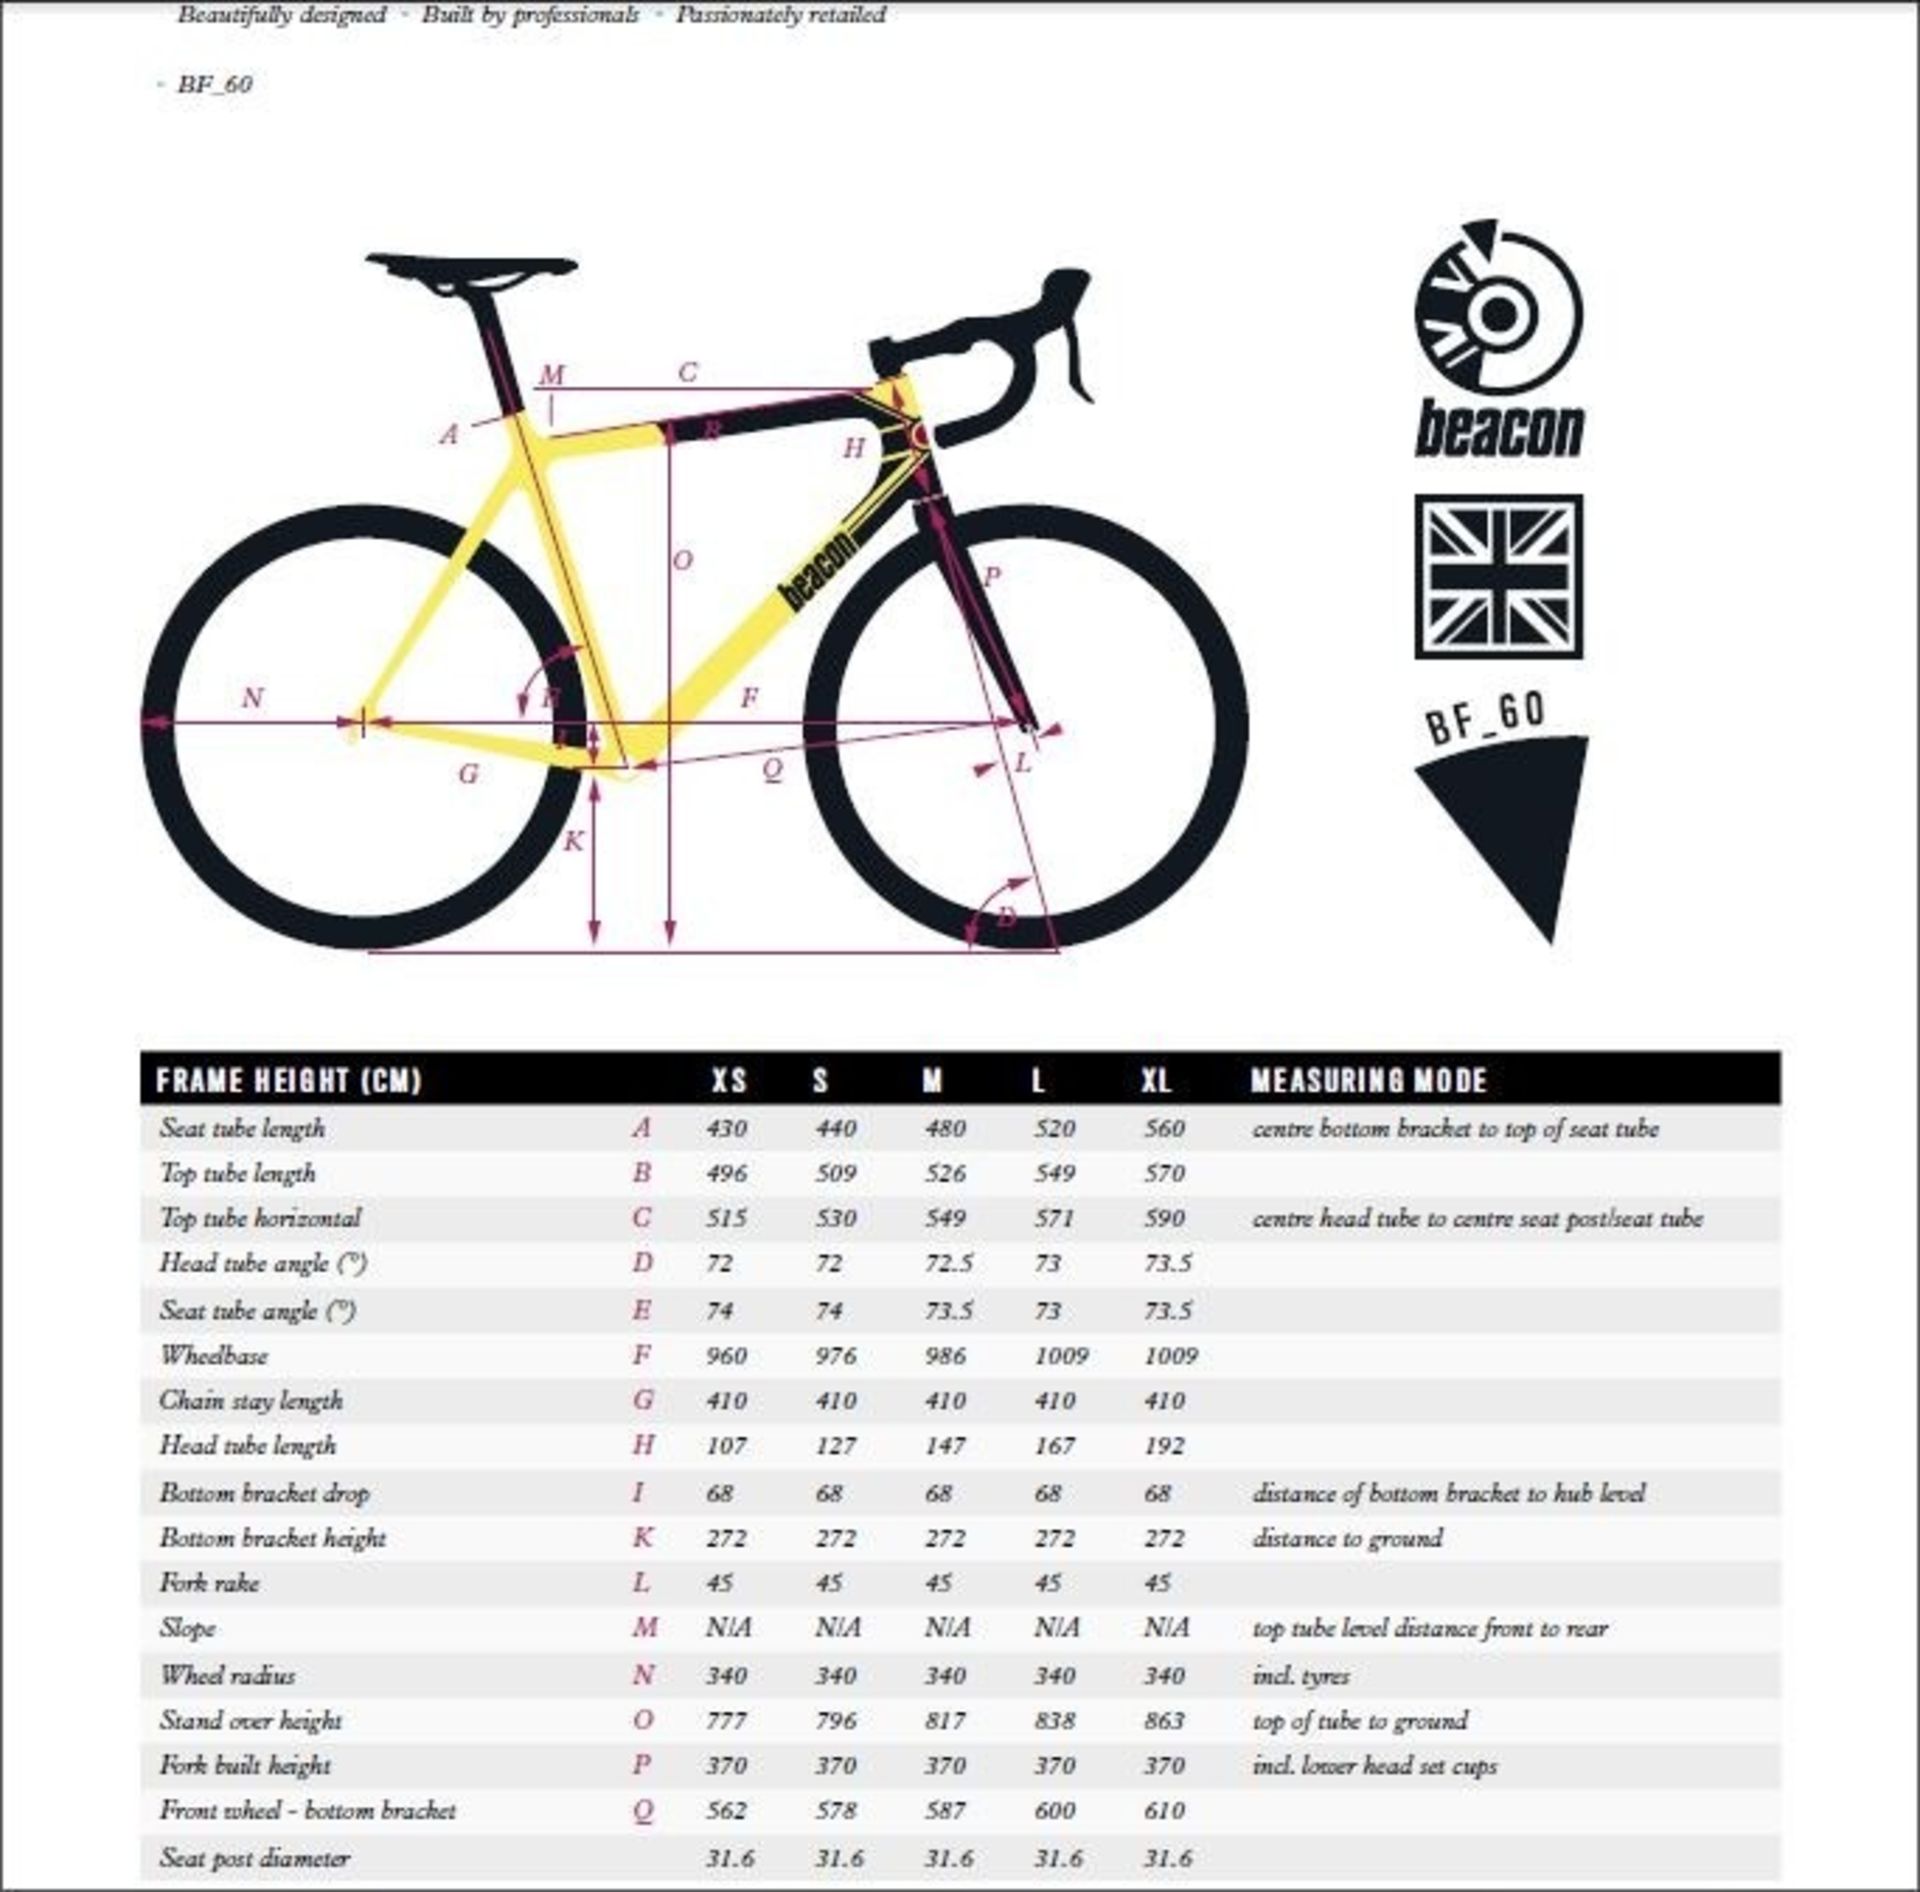 1 x Beacon Model BF-60, Size 480, Carbon Fibre Bike Frame in Yellow & Black. - Image 3 of 3